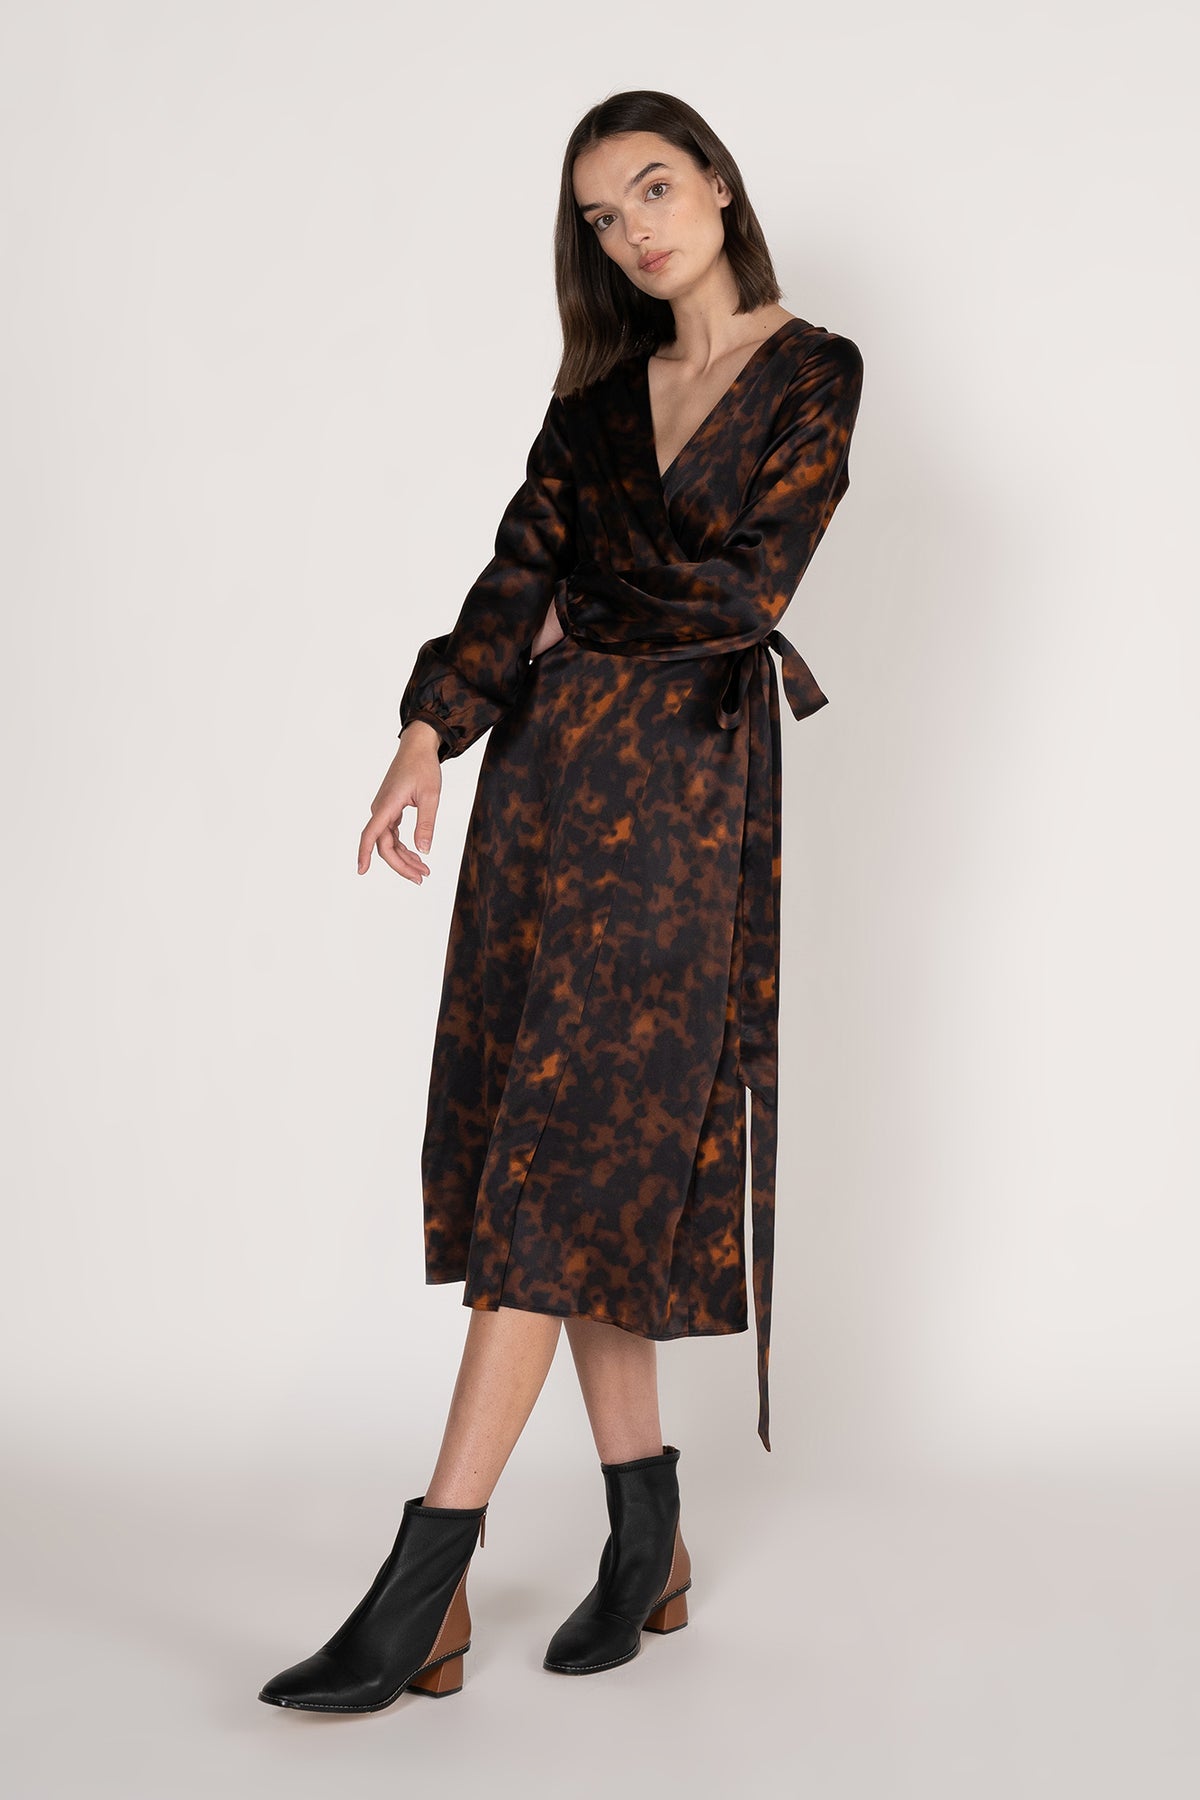 GINIA Madeline Wrap Dress in Ember